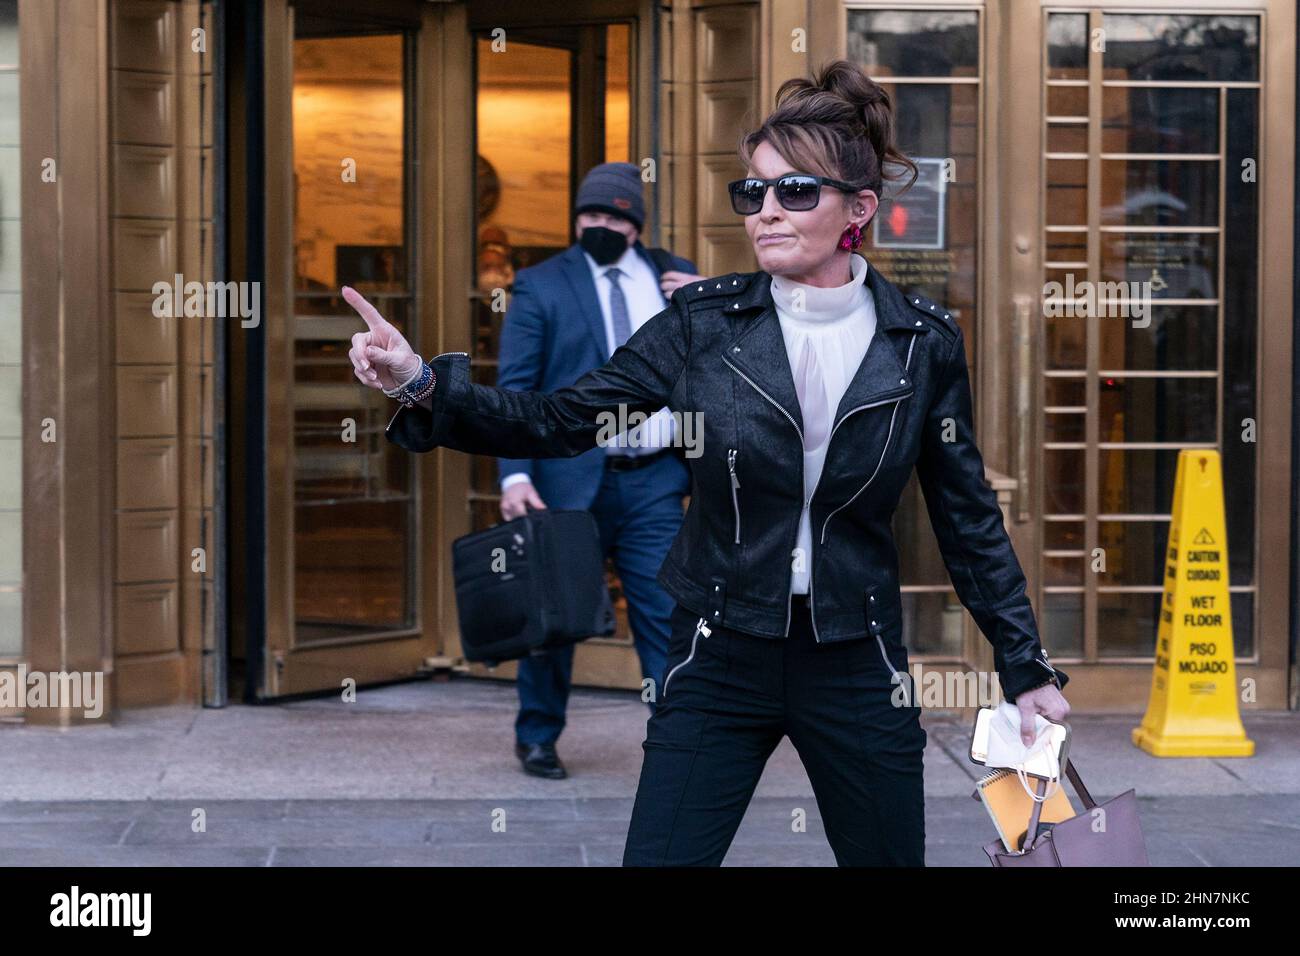 New York, USA. 14th Feb, 2022. Sarah Palin, former Governor of Alaska leaves court after judge Jed Rakoff dismissed her libel case against The New York Times at U.S. Southern District Court in New York on february 14, 2022. She briefly addressed the media in front of the court. The jury is still deliberating as the judge made his decision apparently did not know about it. The judge said Palin had failed to show that The New York Times had acted out of malice. (Photo by Lev Radin/Sipa USA) Credit: Sipa USA/Alamy Live News Stock Photo